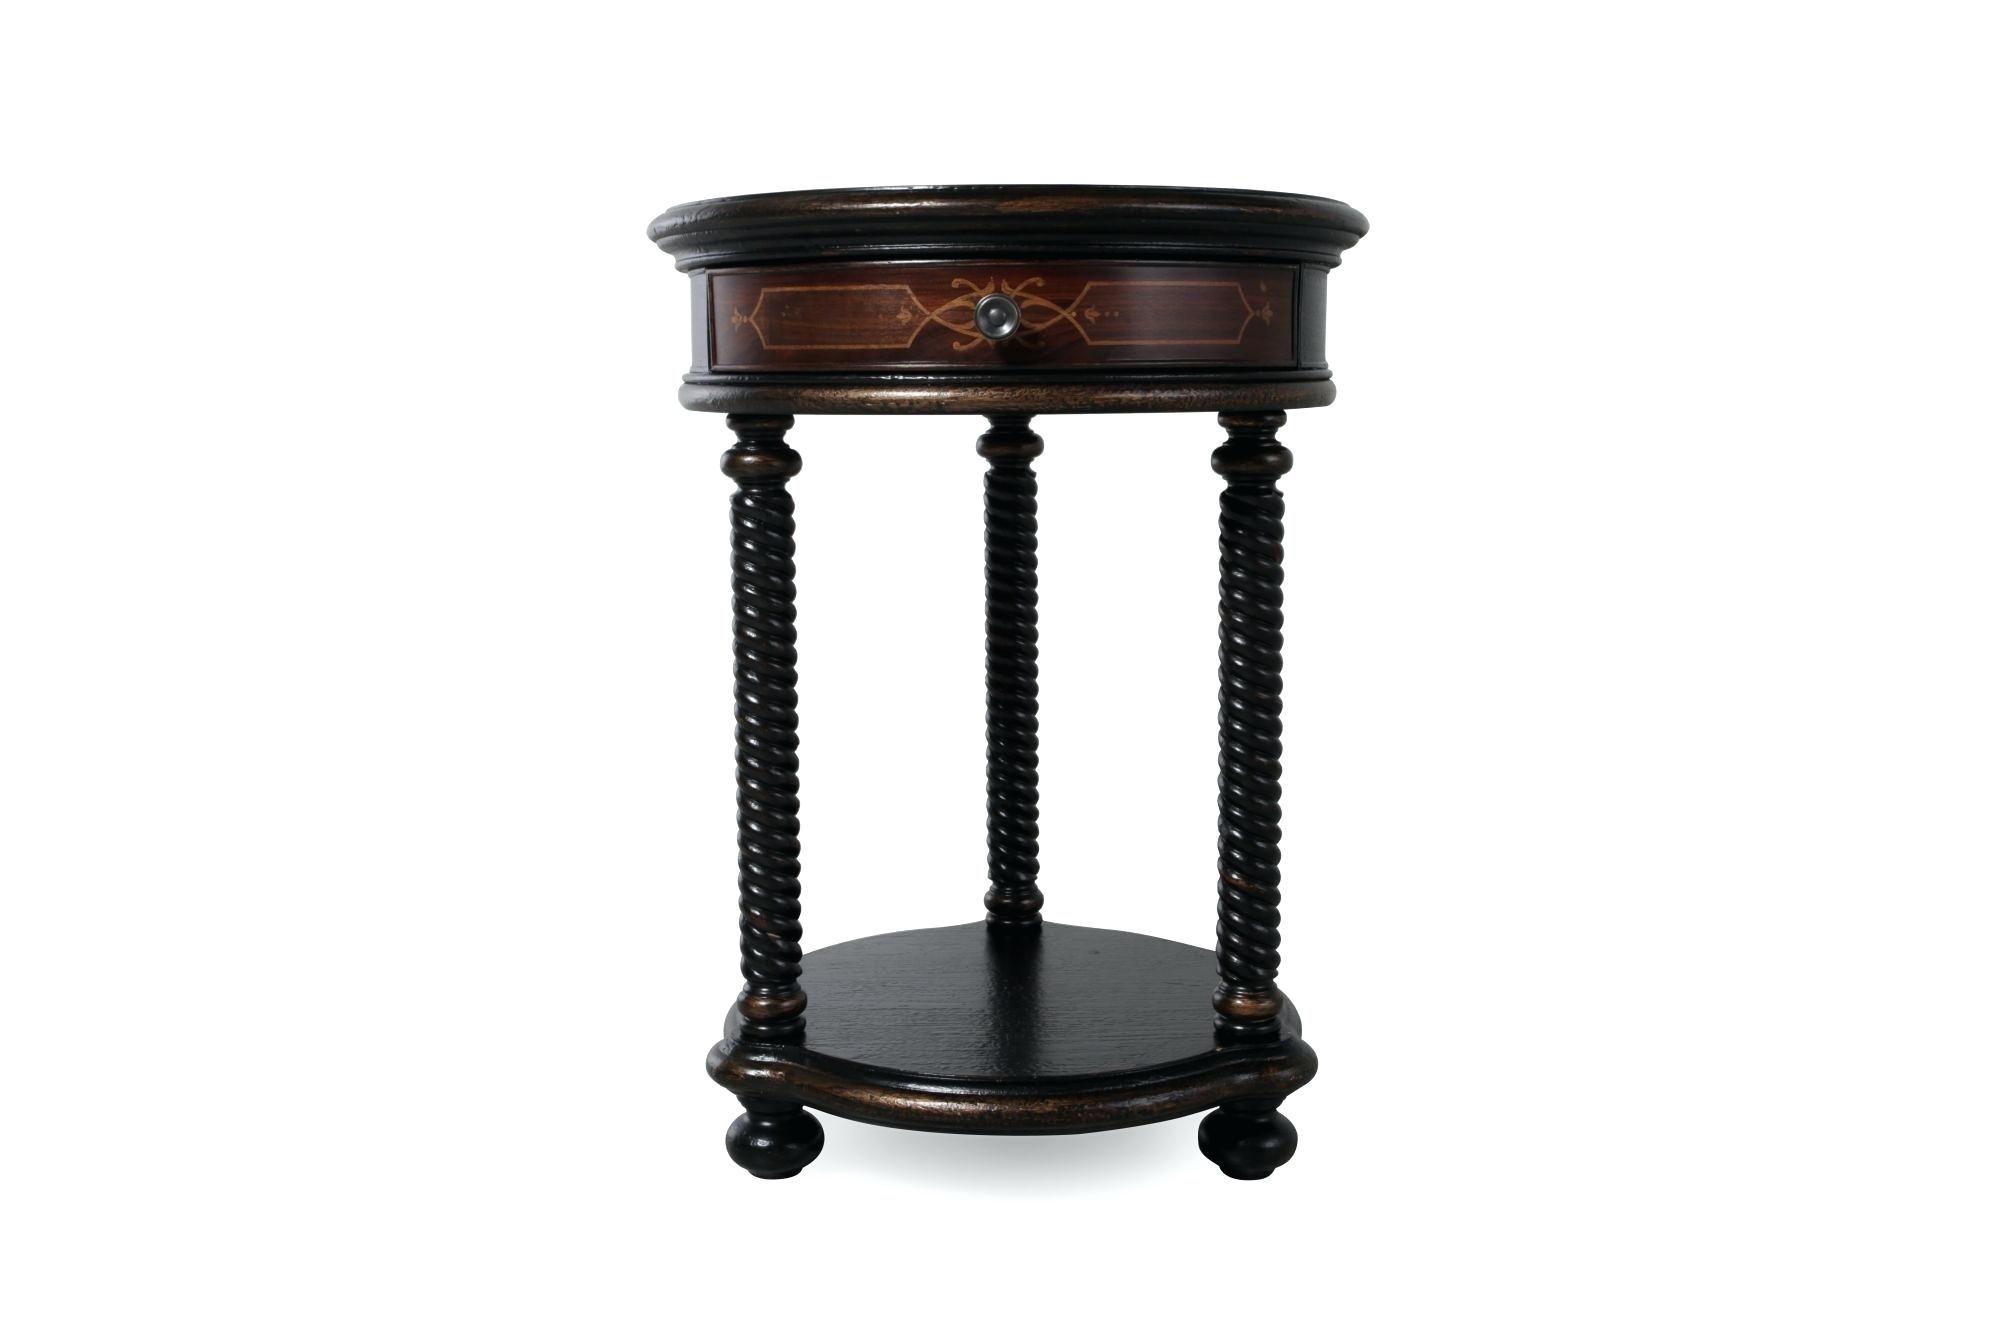 round accent table impact small twisted legs traditional black ideas tall glass lamps lucite outdoor pub set ashley furniture lift coffee side with cooler square storage baskets